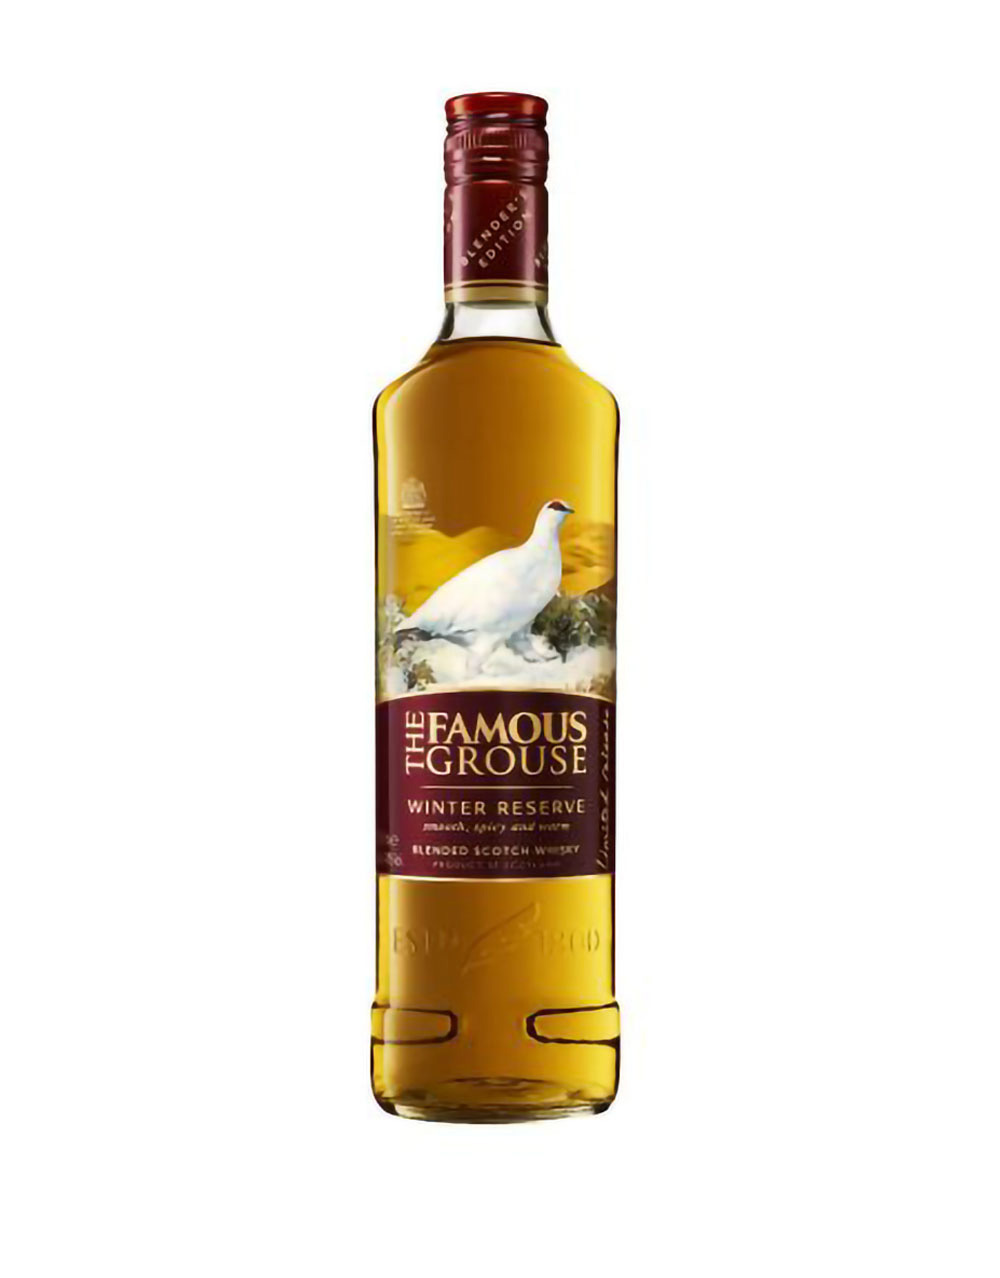 The Famous Grouse Winter Reserve Scotch Whisky